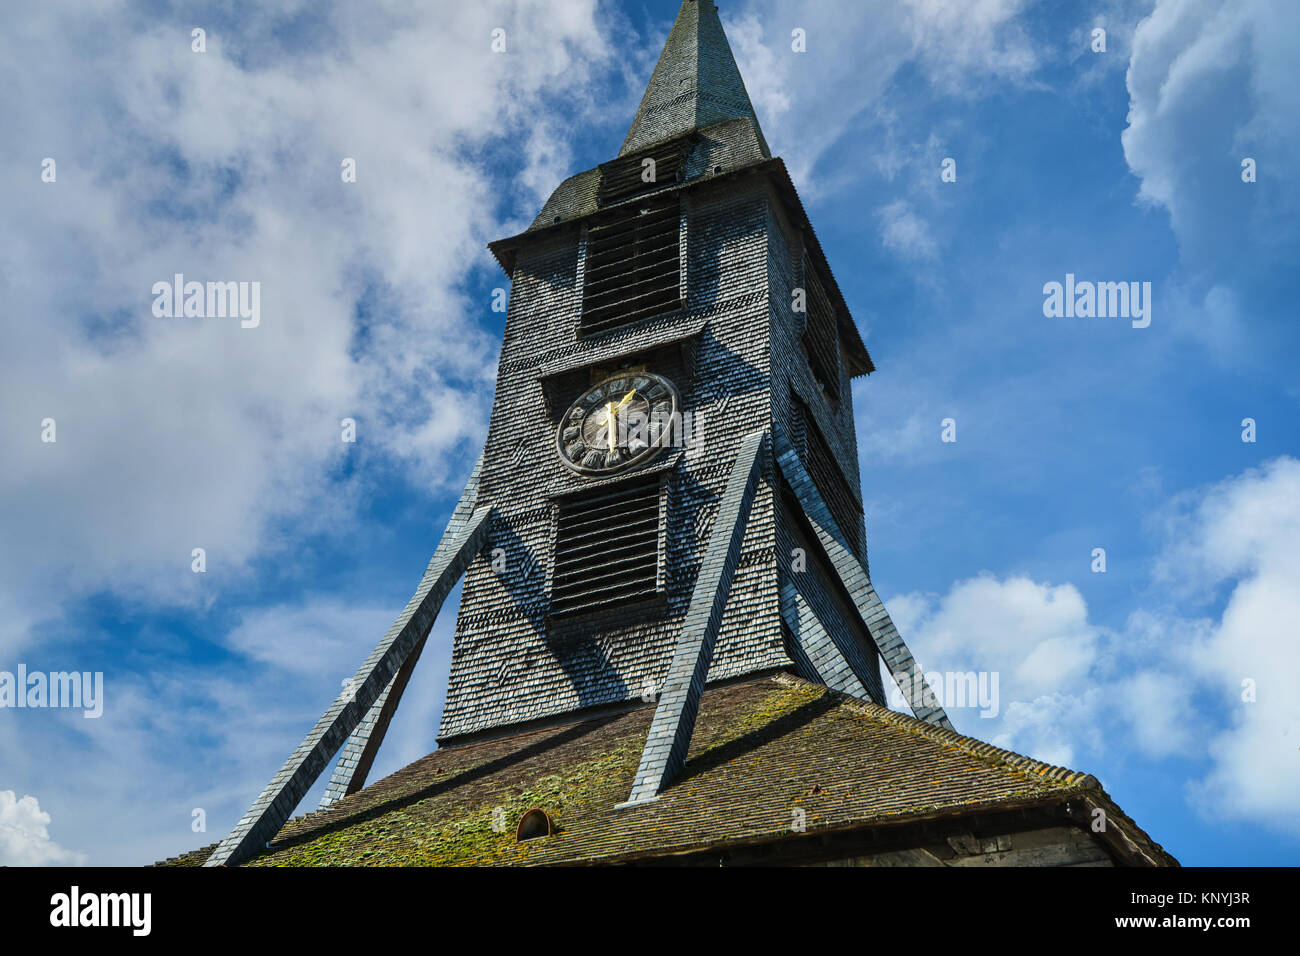 The 15th century, timber built Saint Catherine's church in the Normandy port town of Honfleur France Stock Photo